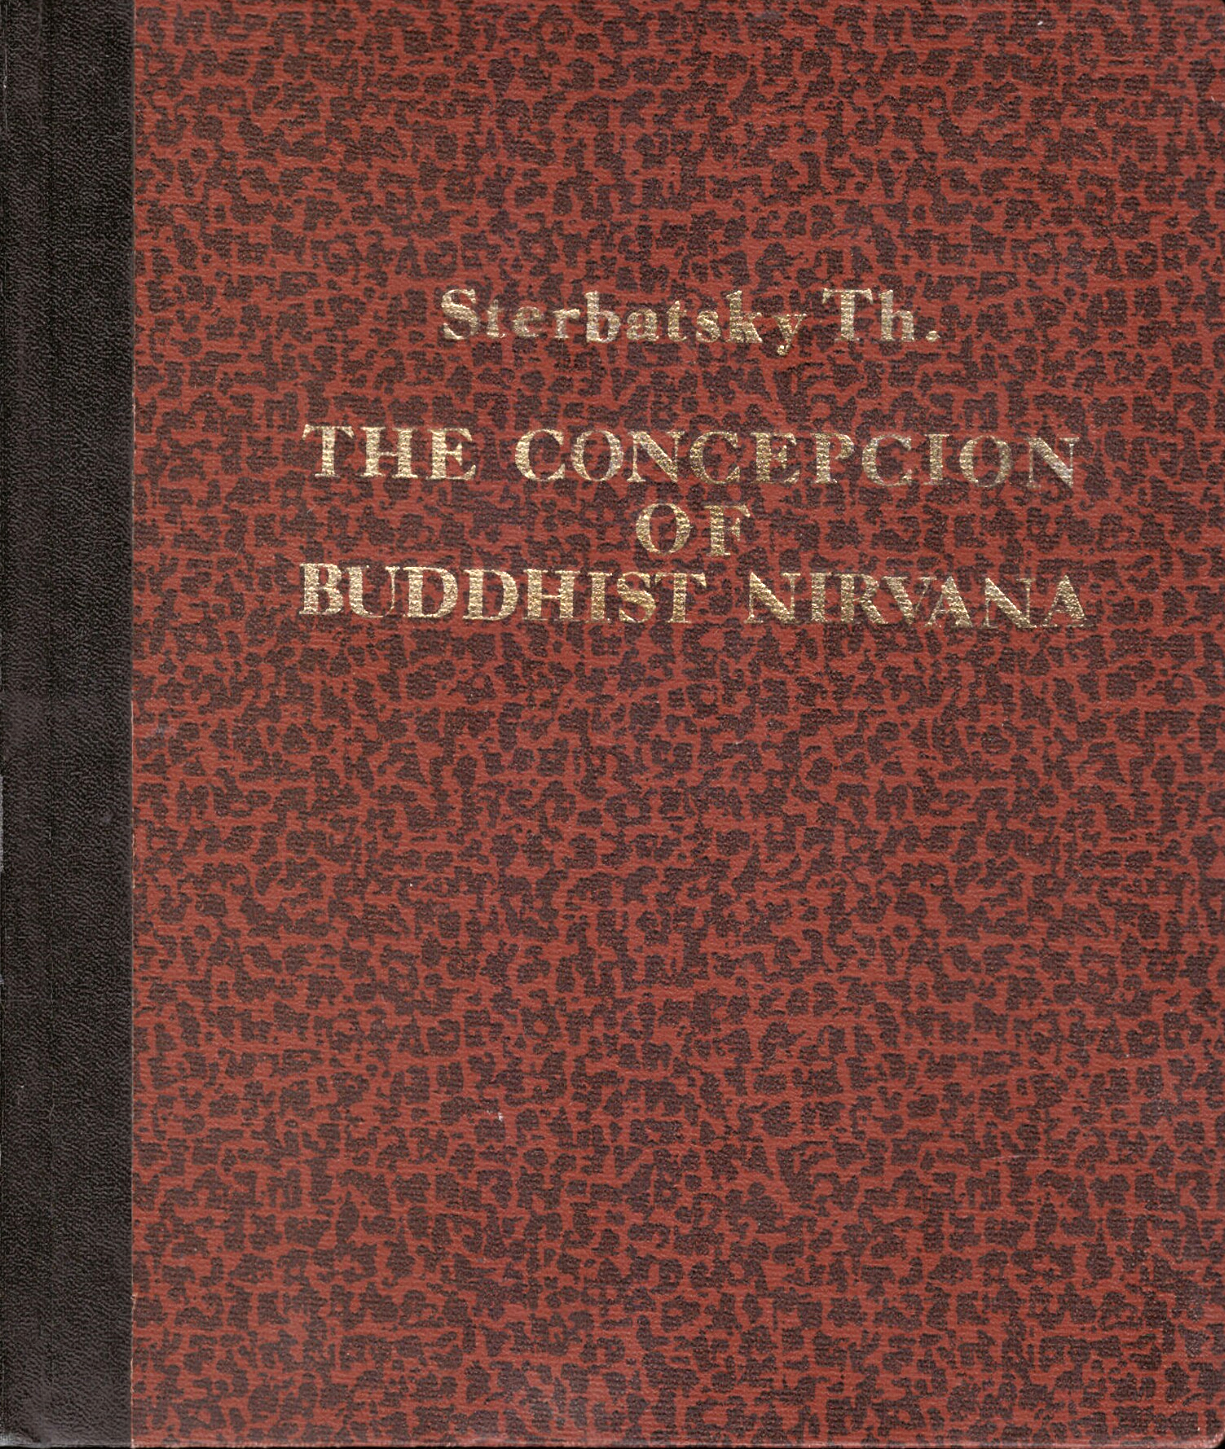 The Conception of Buddhist Nirvana 1927-front.jpg